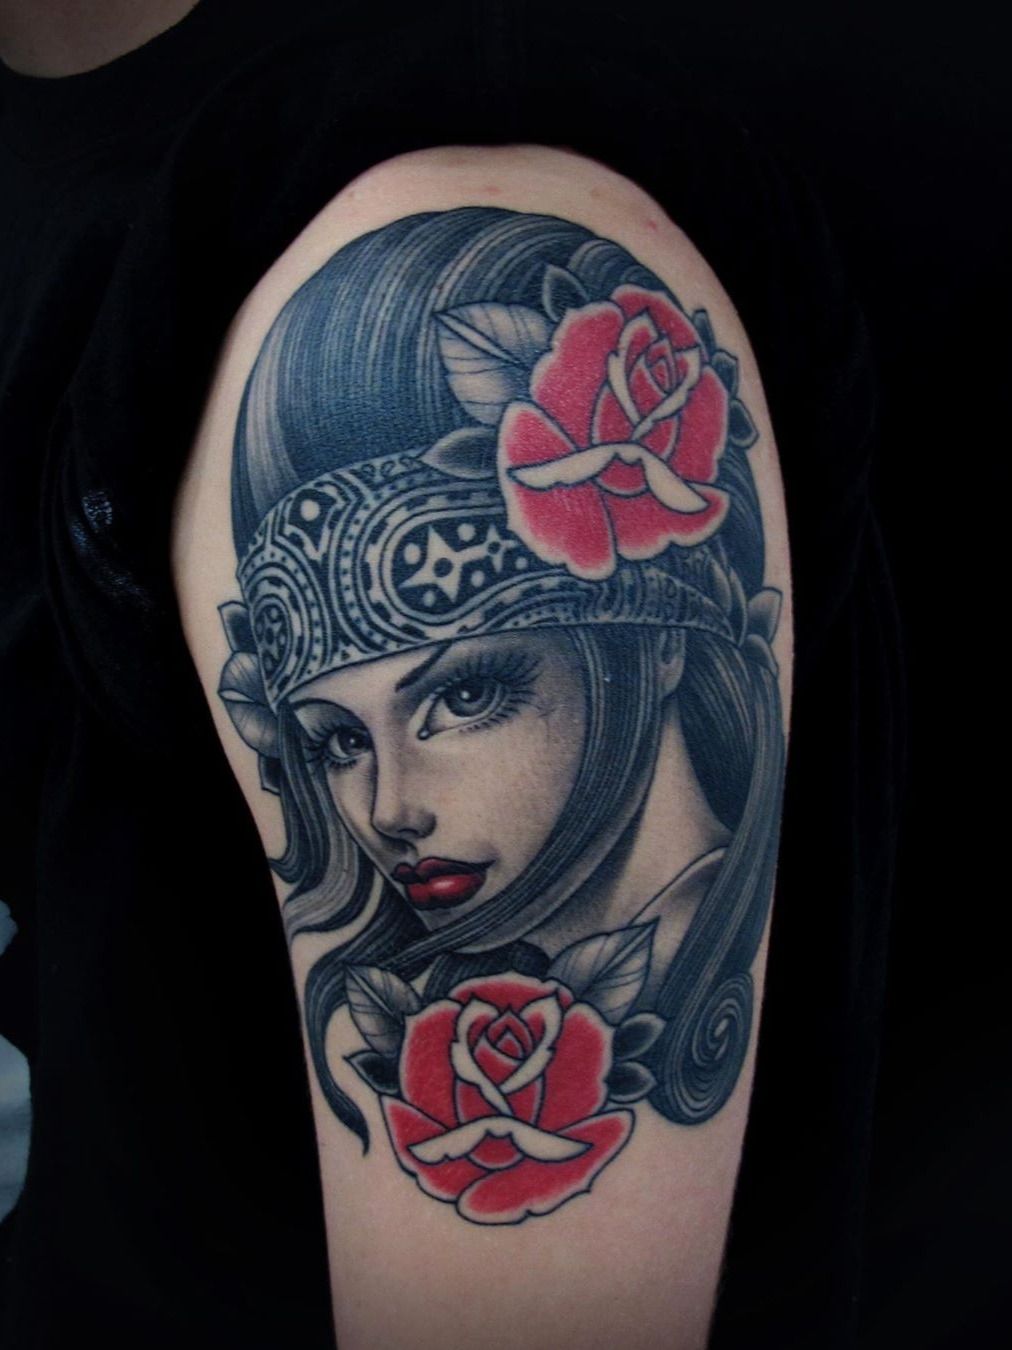 Snake Lady Tattoos From Myth to Your Skin  All Things Tattoo